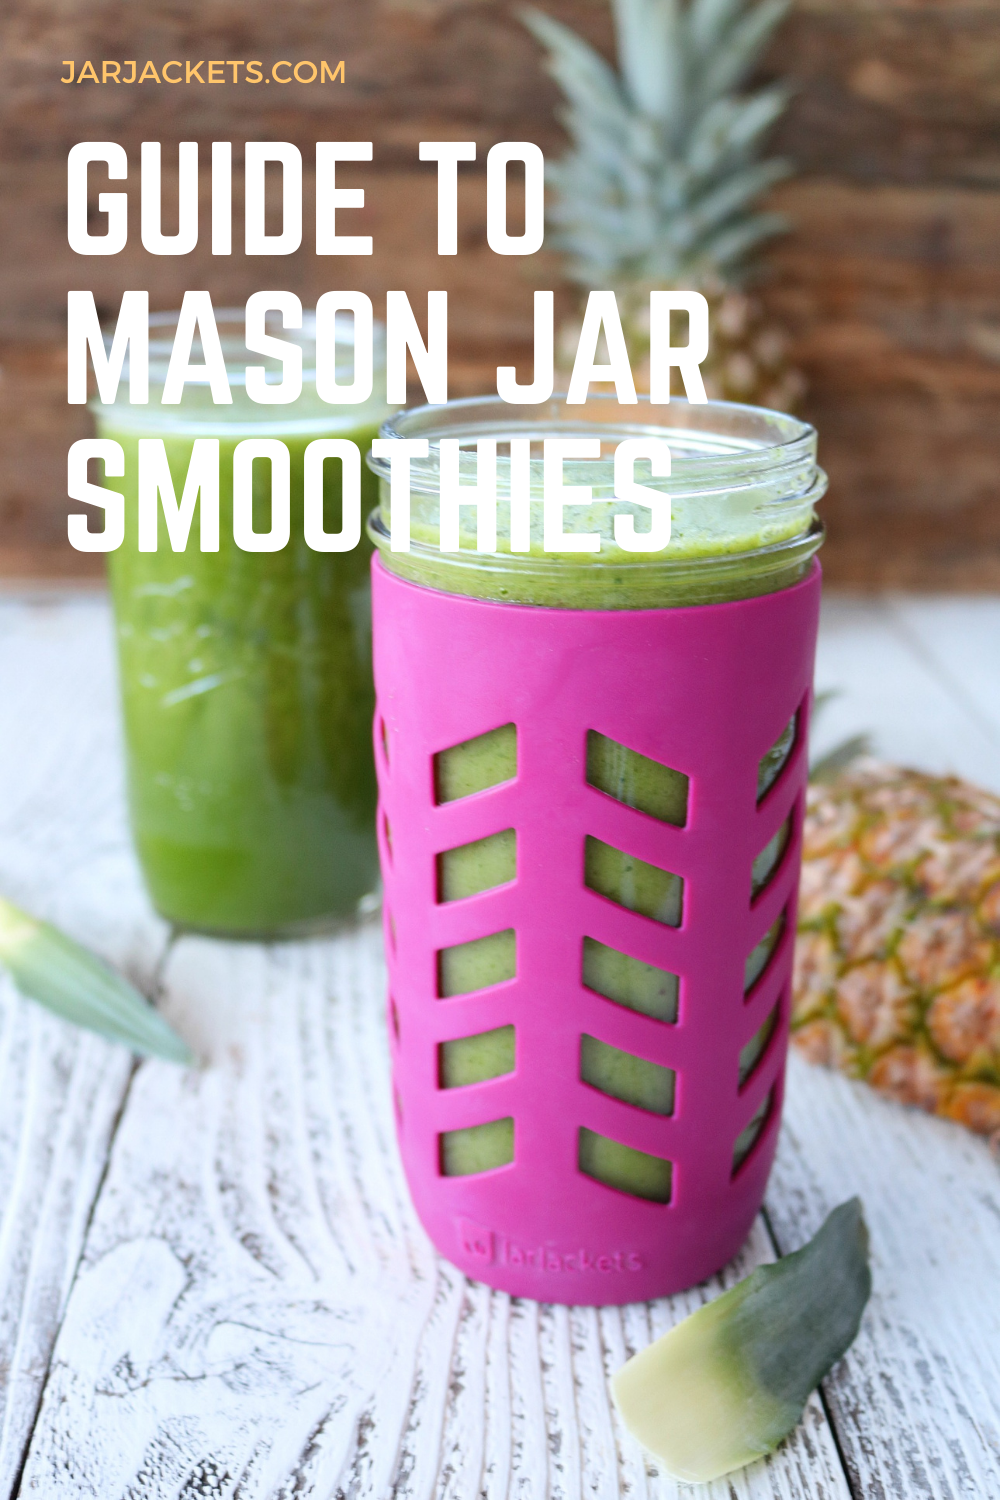 Two green smoothies are on a table in Mason jars.